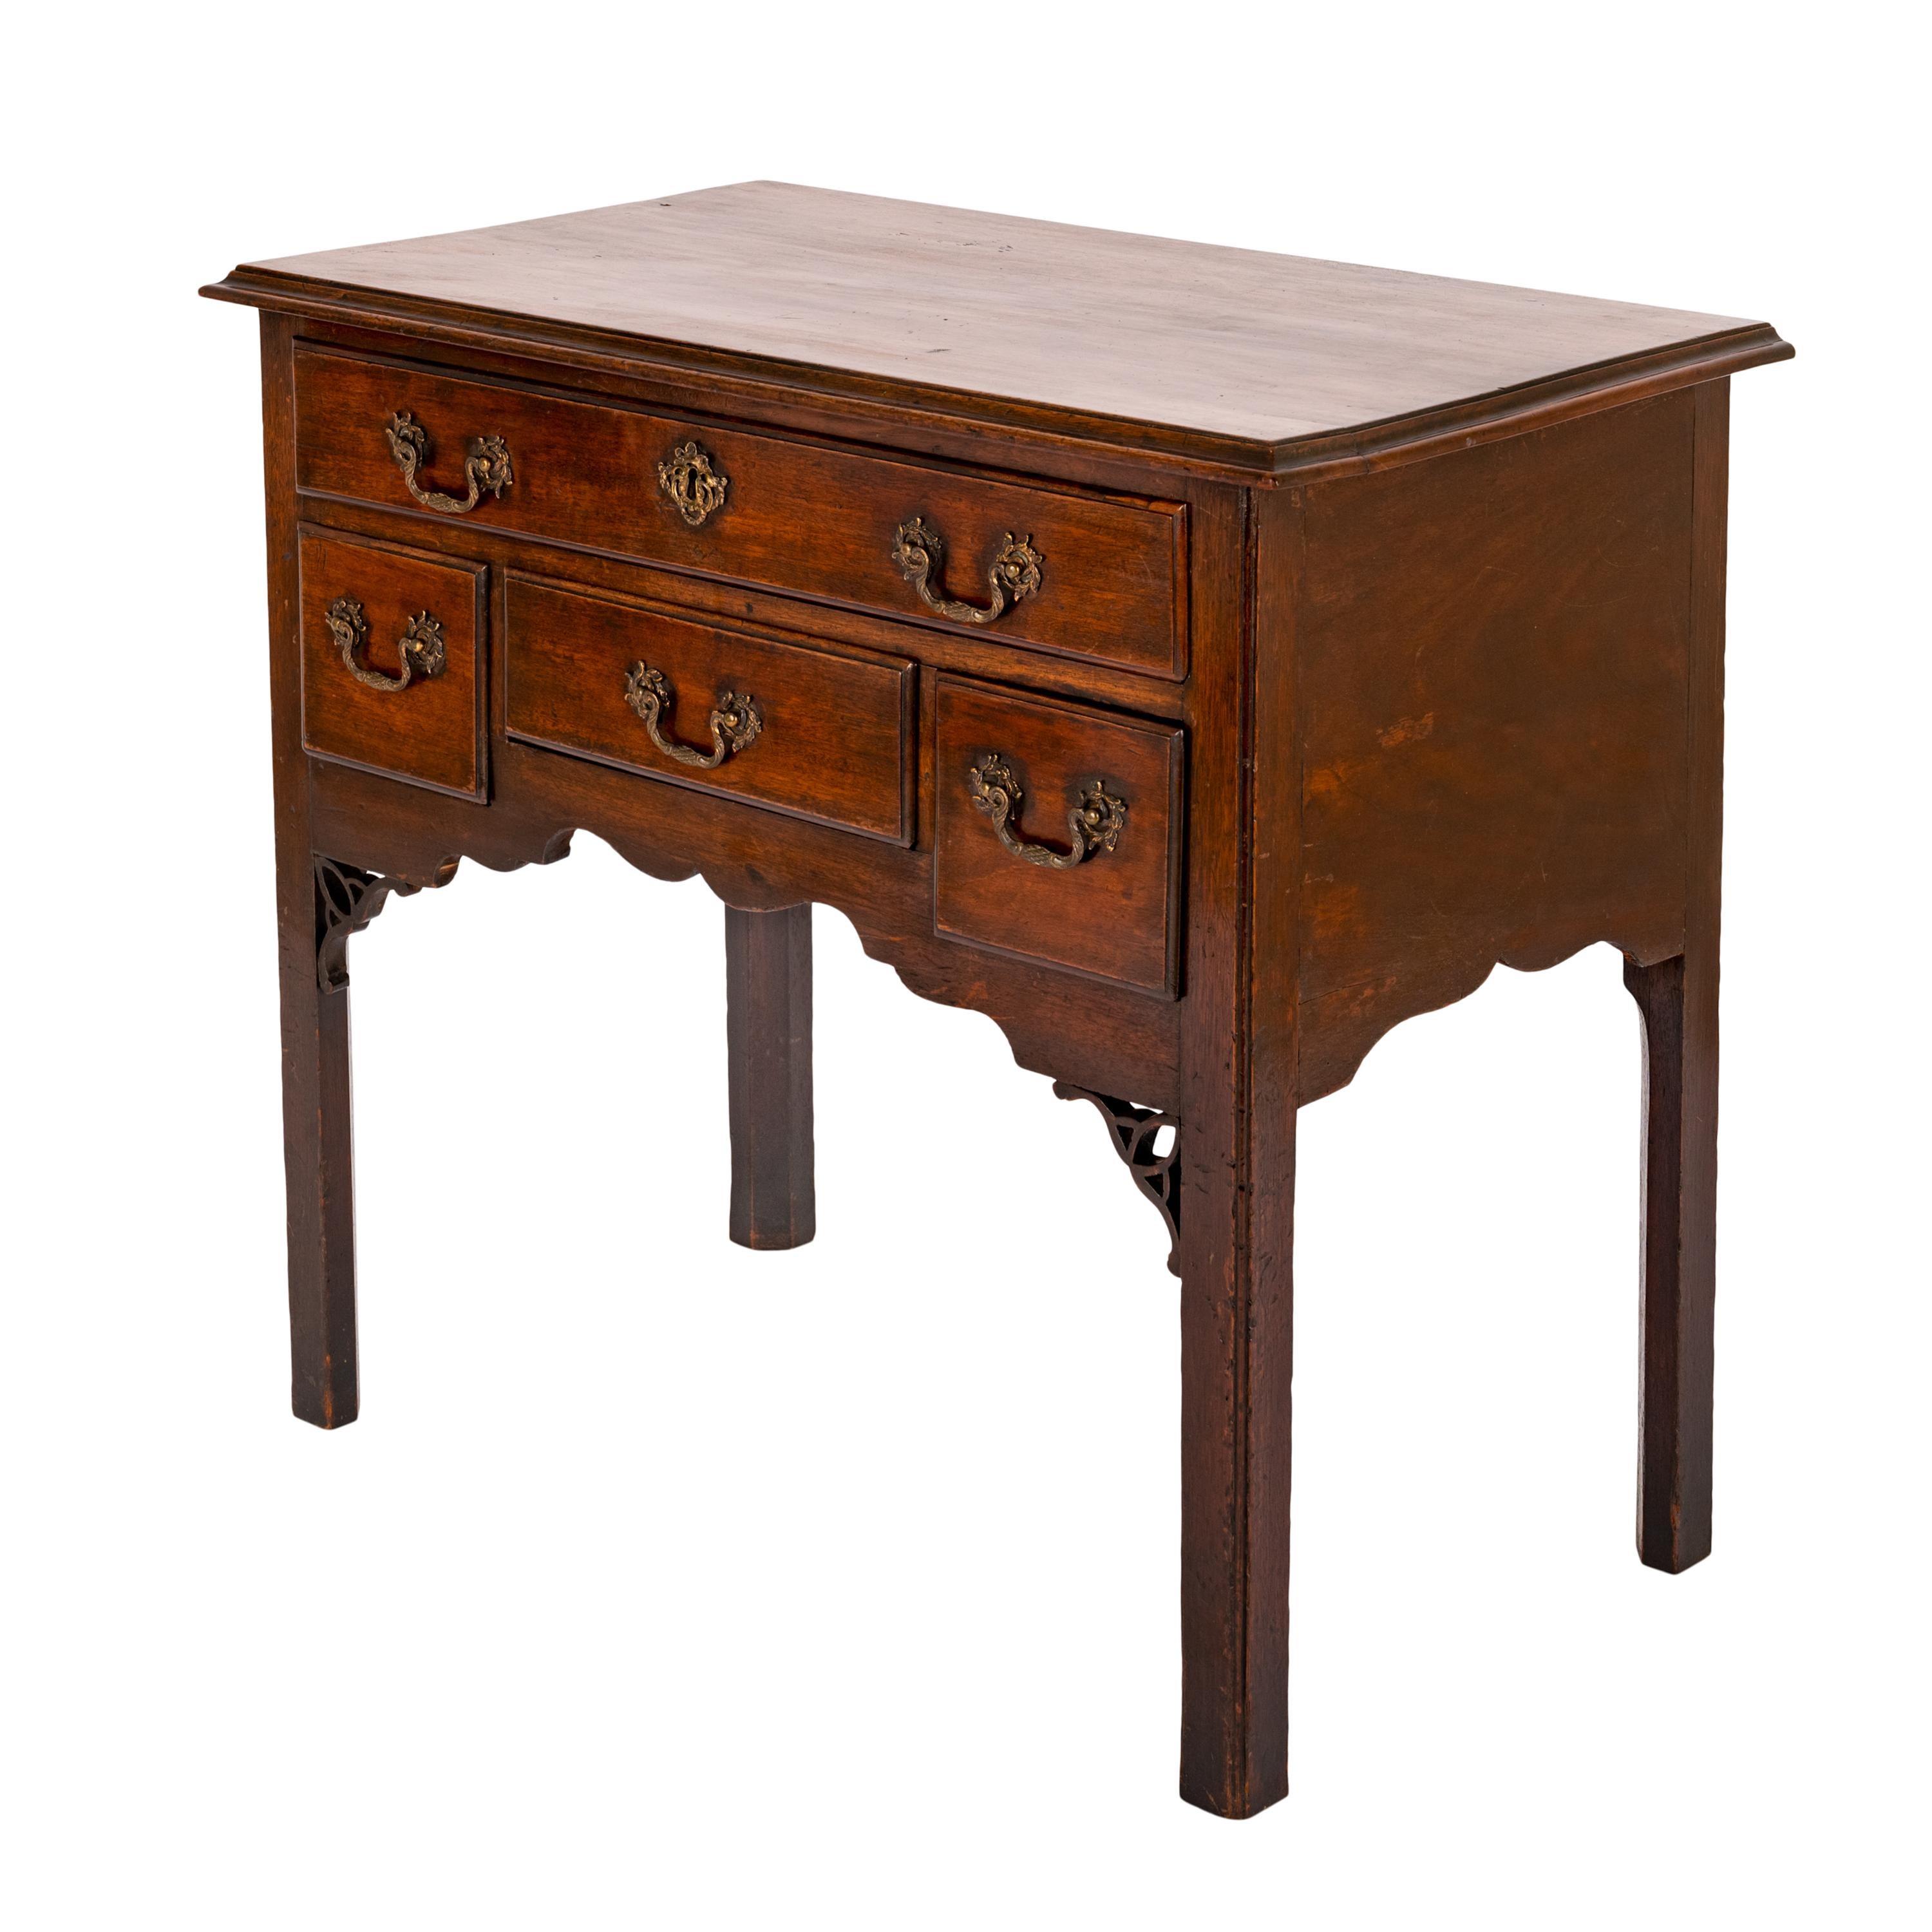 Mid-18th Century Antique English 18th C Georgian Mahogany Chippendale Lowboy Side Table 1750 For Sale